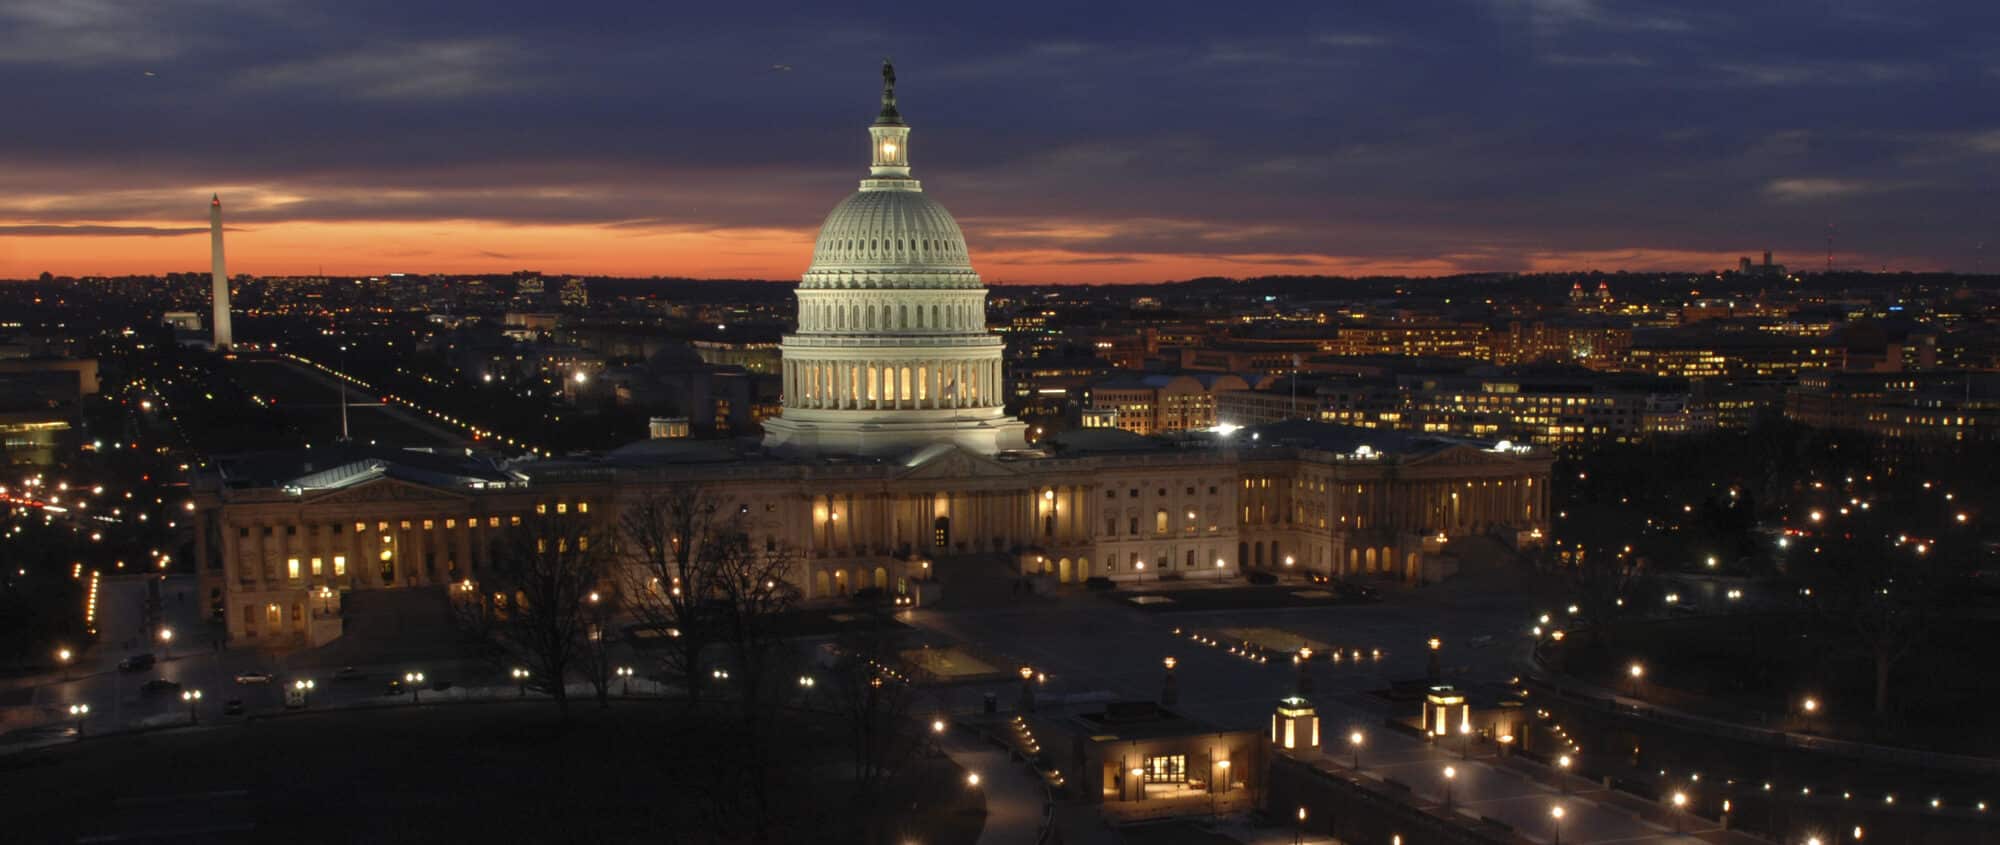 Overhead view of the US Capitol at night